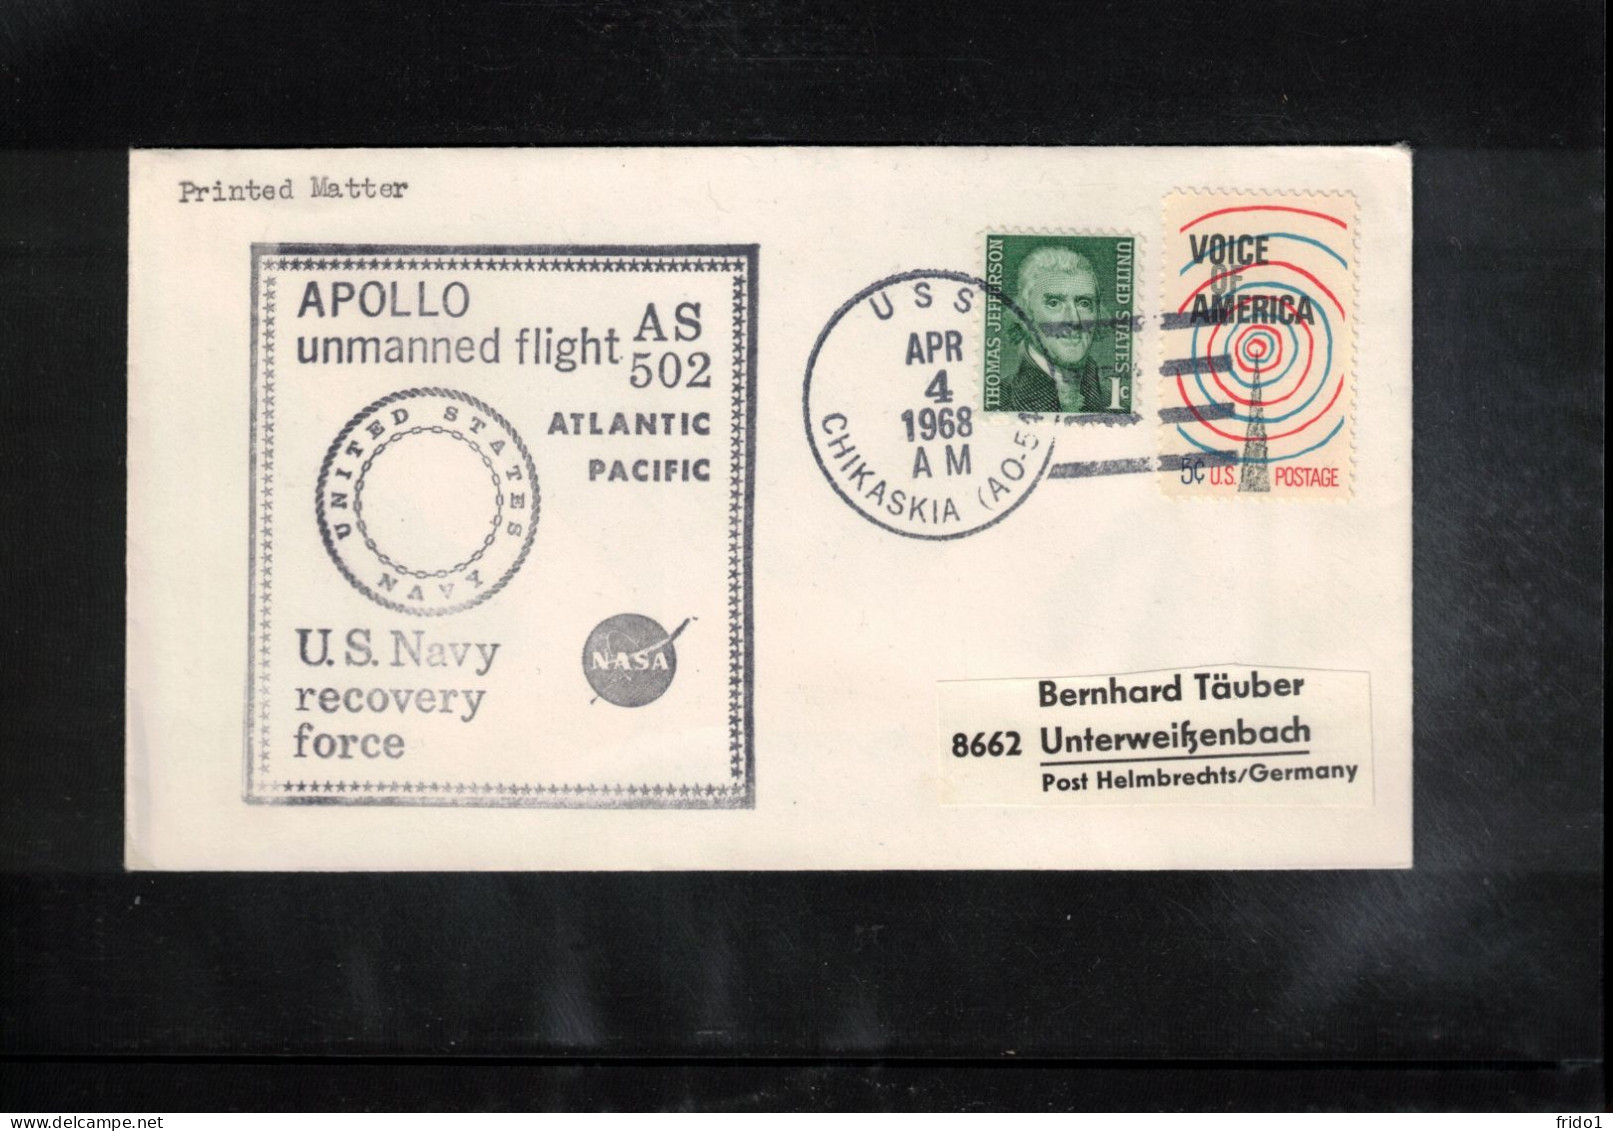 USA 1968 Space / Weltraum Apollo Unmanned Flight AS 502 - US Navy Recovery Force Ship USS Chikaskia Interesting Cover - Estados Unidos